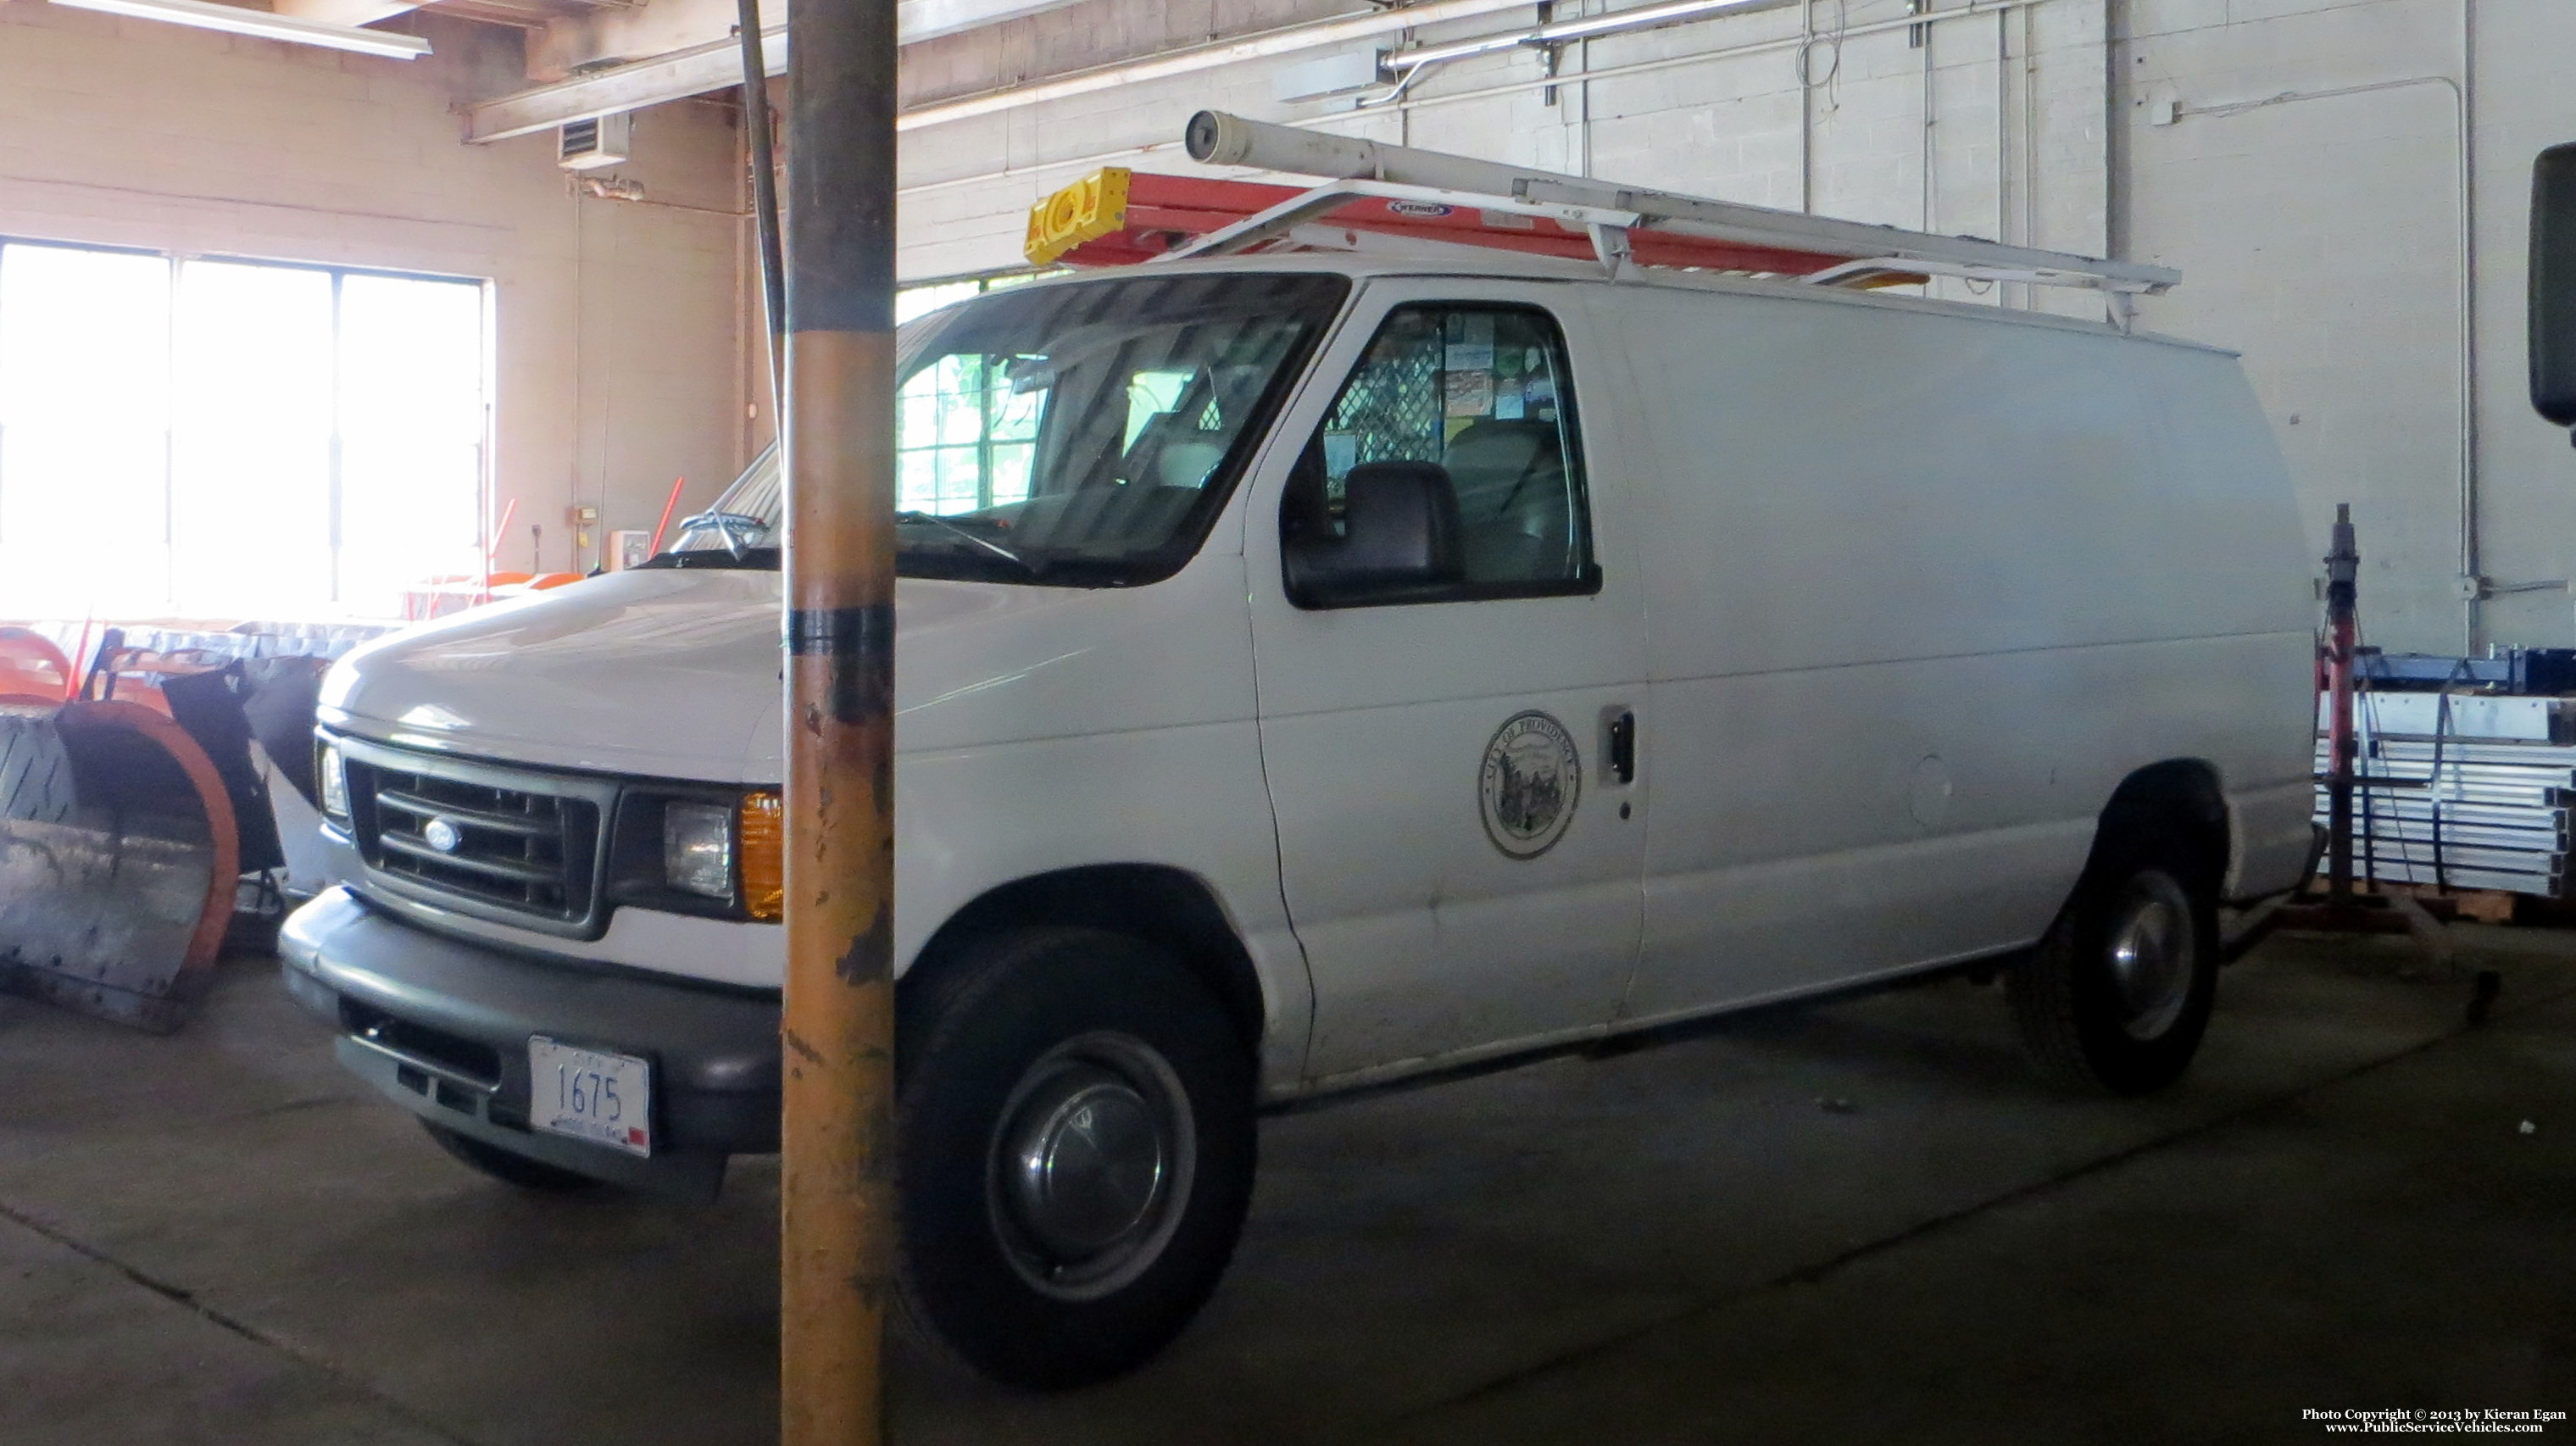 A photo  of Providence Sewer Division
            Van 1675, a 1997-2007 Ford Econoline             taken by Kieran Egan